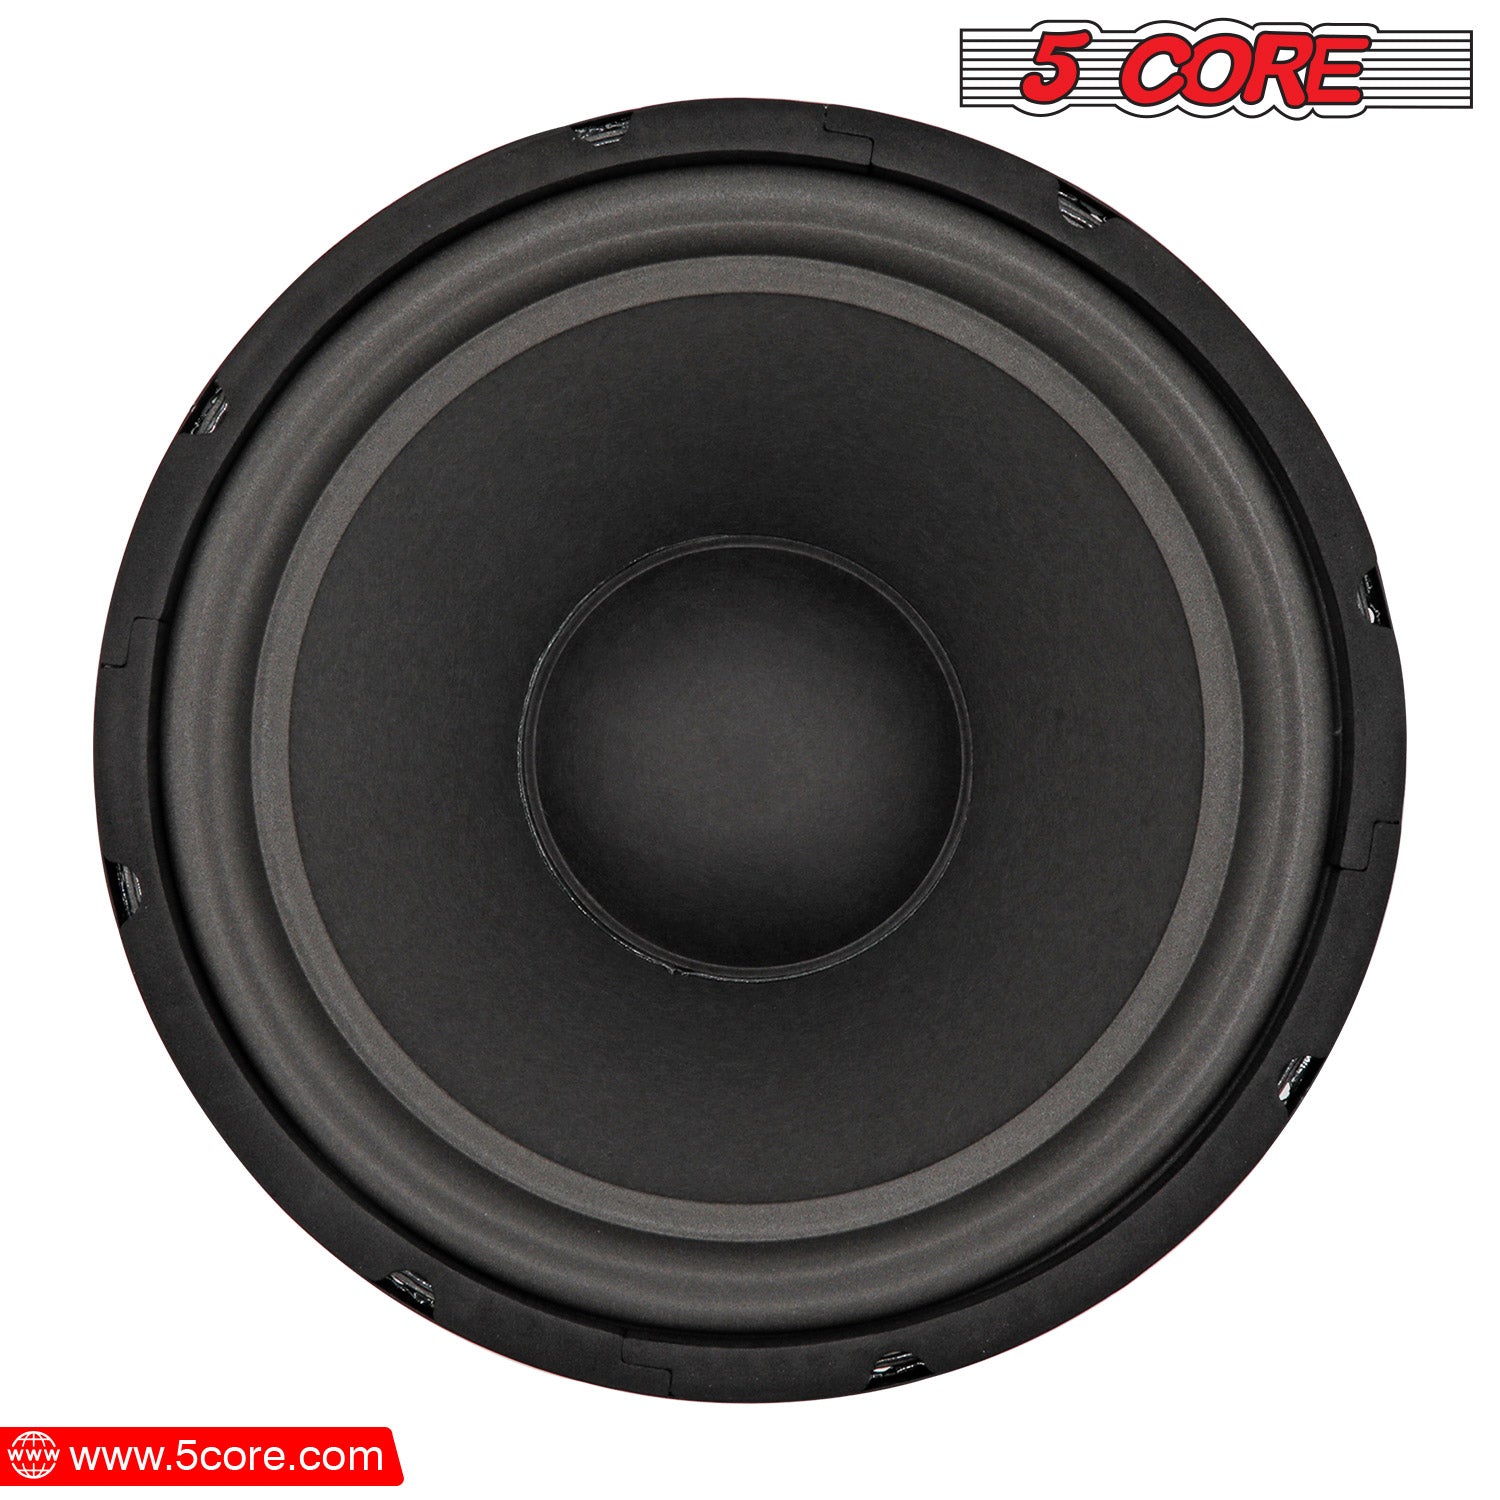 DJ Audio Replacement Sub Woofer